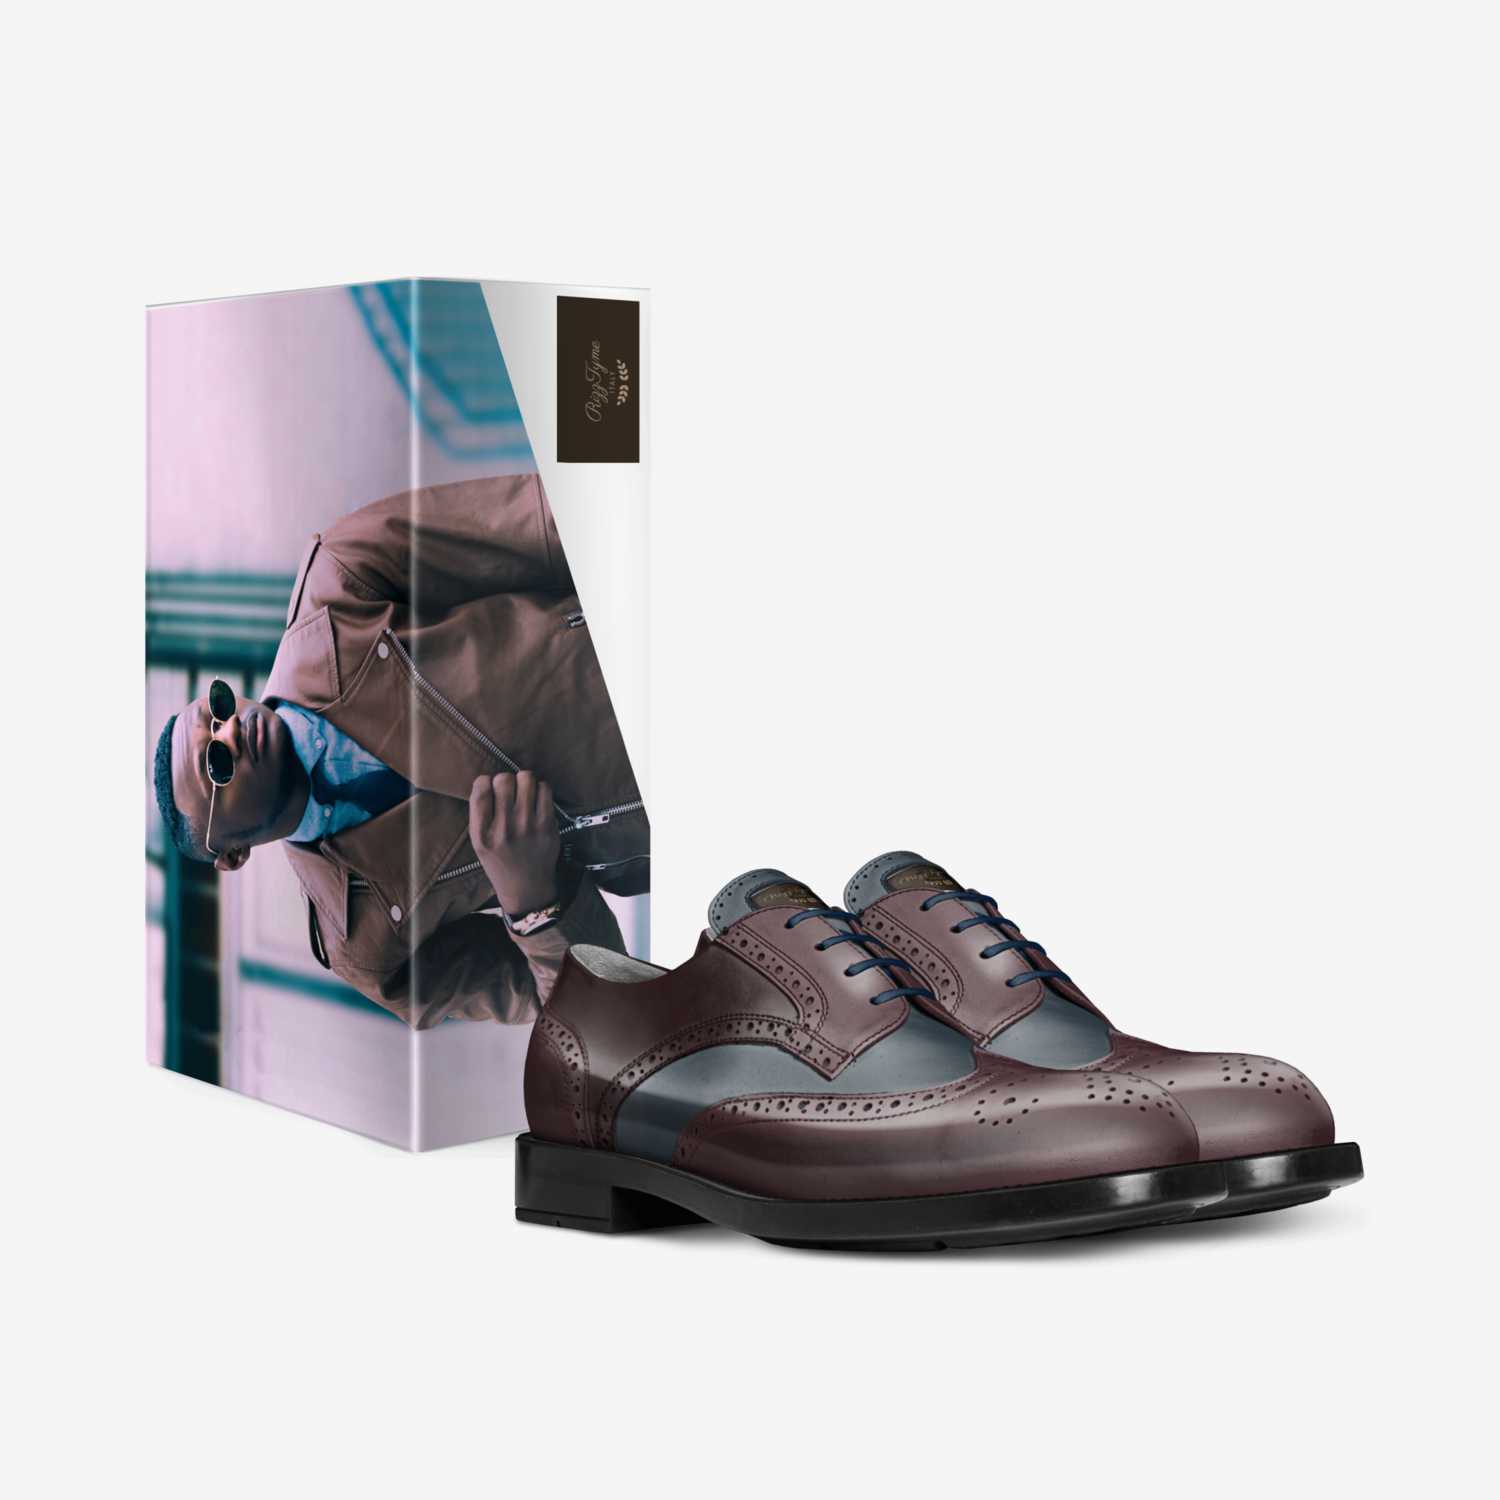 gentlemens touch custom made in Italy shoes by Rodney Jones | Box view